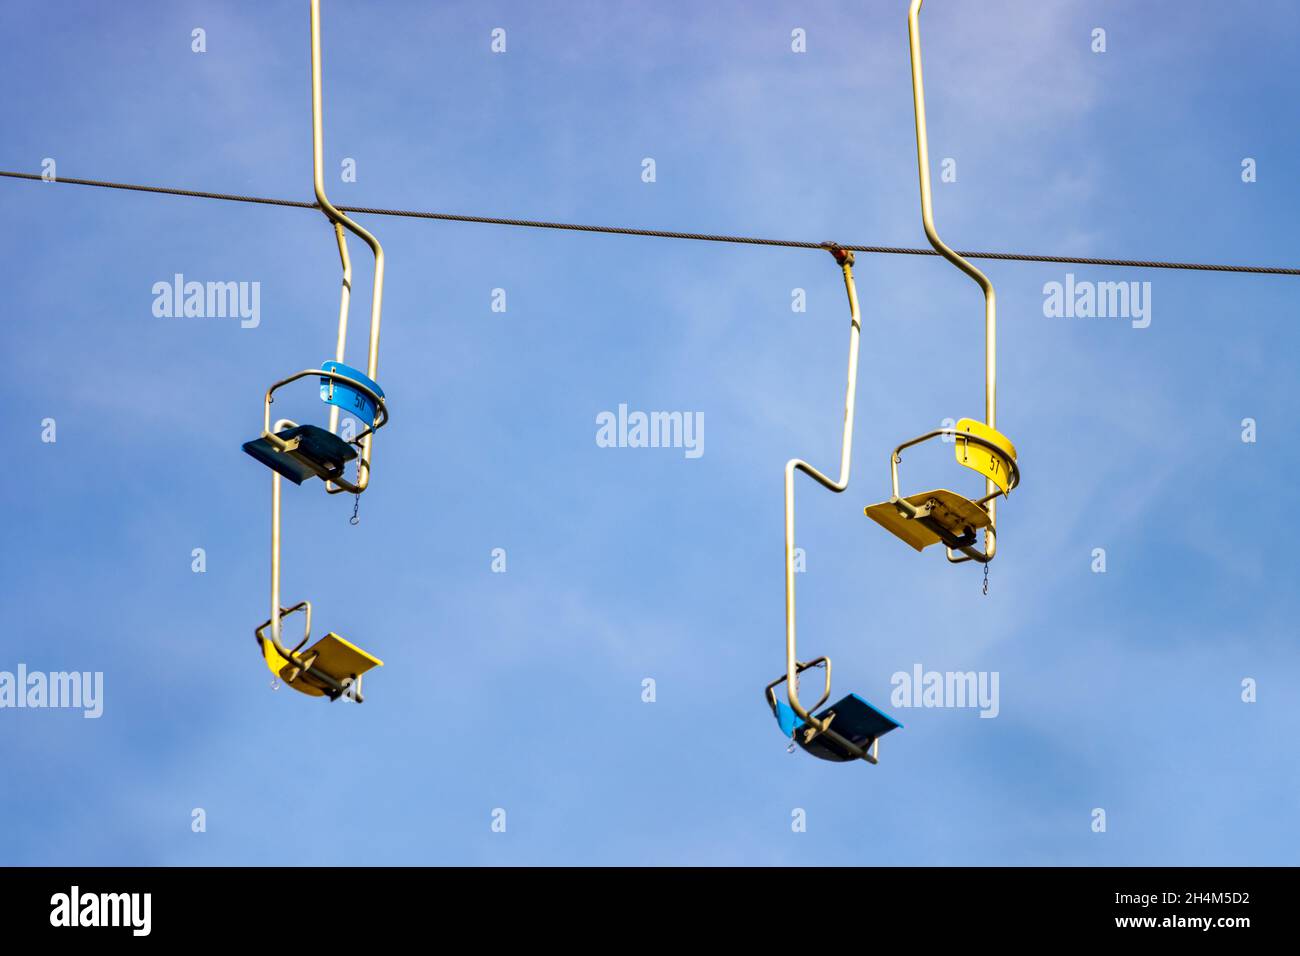 Empty chairlifts hanging on a cable on a background of blue sky Stock Photo